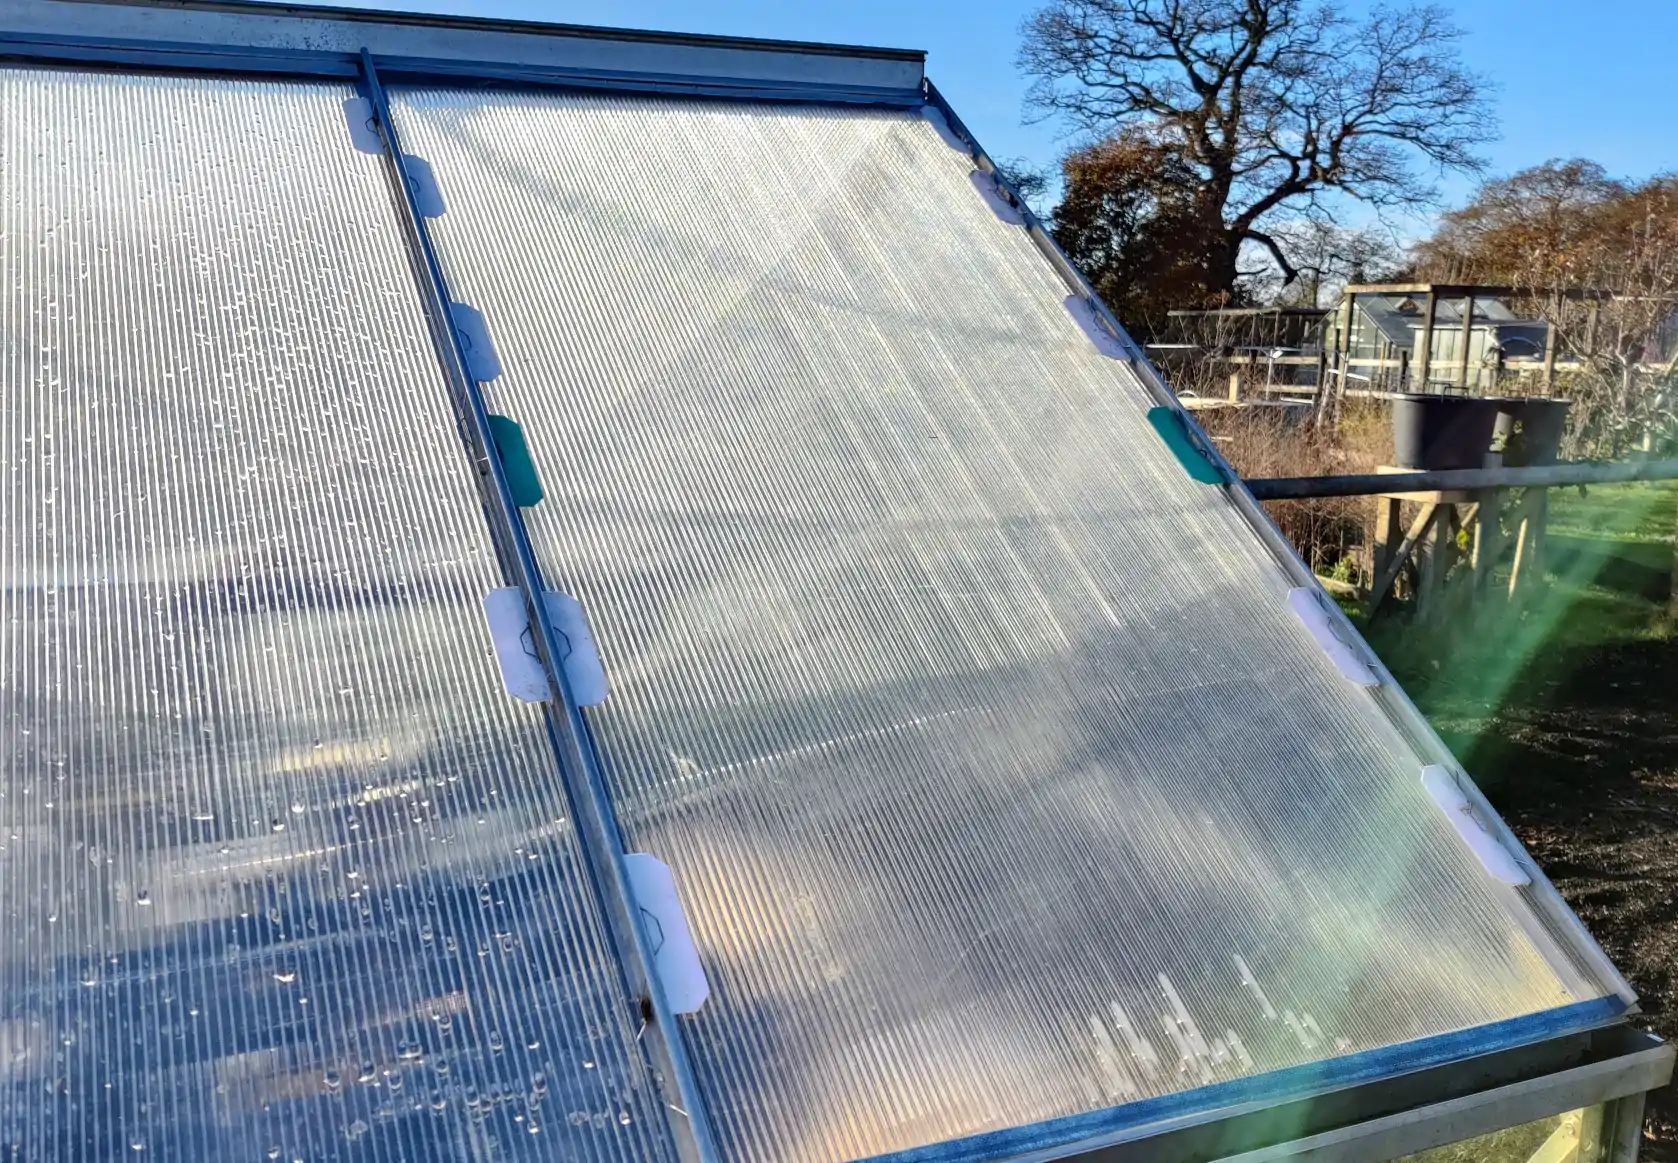 Greenhouse roof pane with 11 &ldquo;retention spreader&rdquo; w clips along the edges